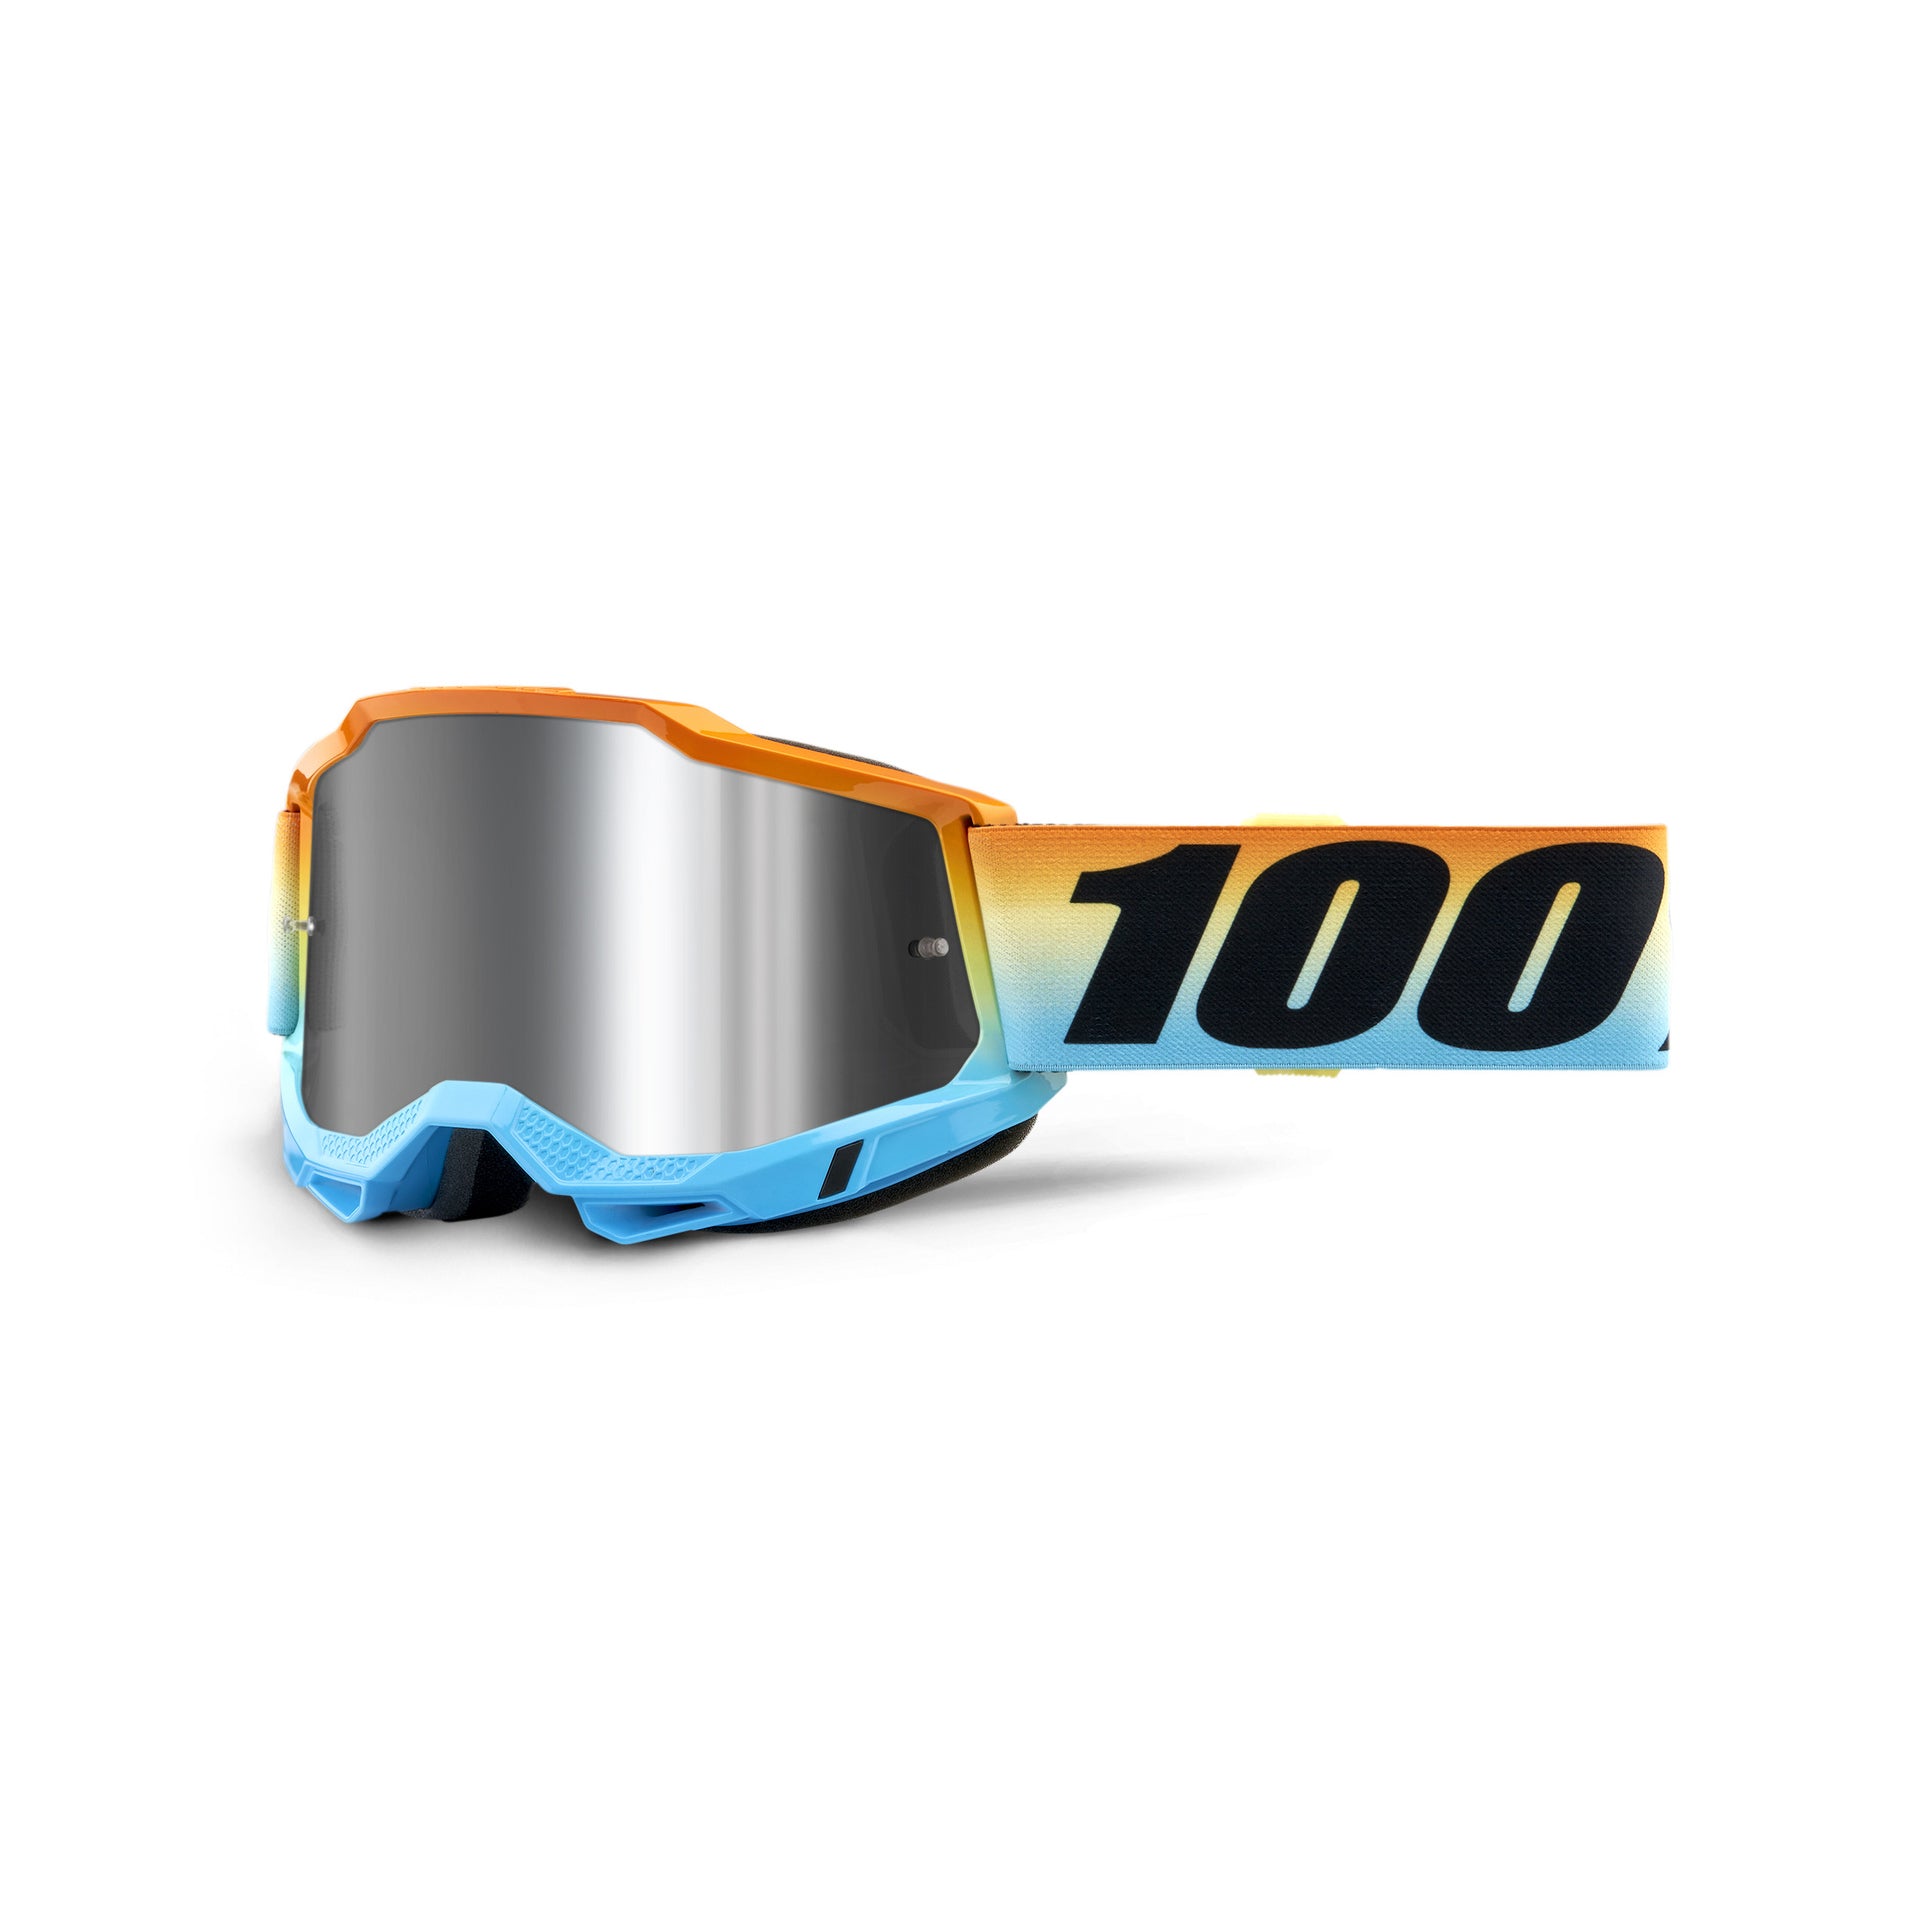 Goggles 100% ACCURI 2 SUNSET - FLASH SILVER LENS